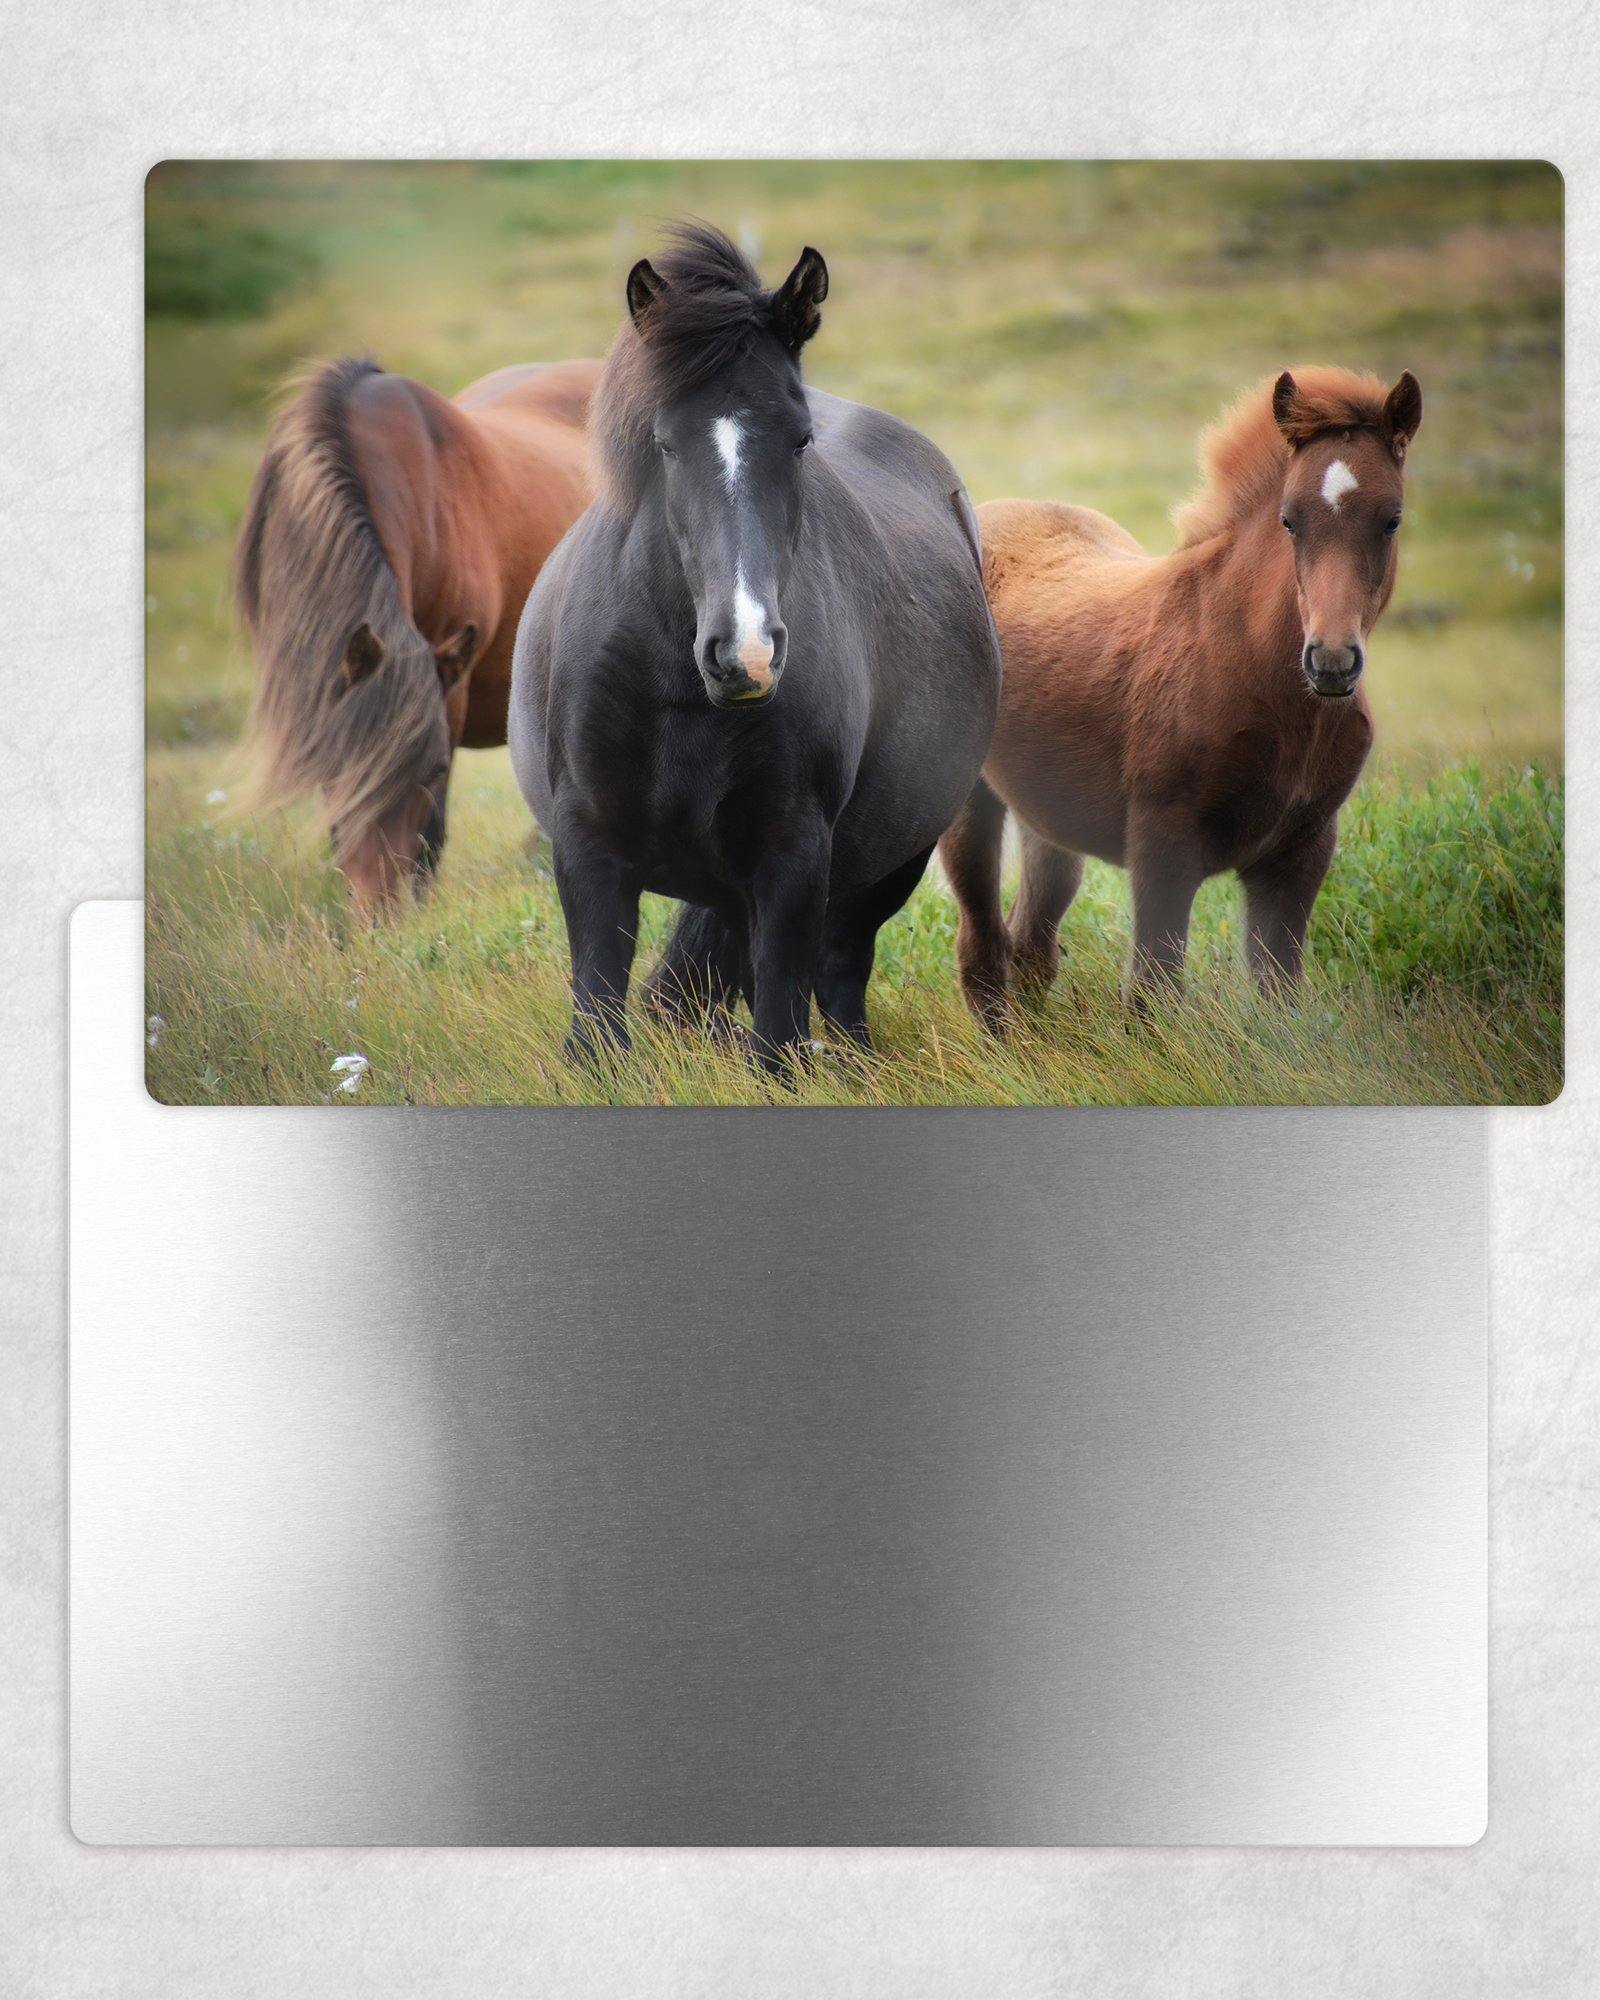 Horses in Pasture Metal Photo Panel - 8x12 or 12x18 - Schoppix Gifts